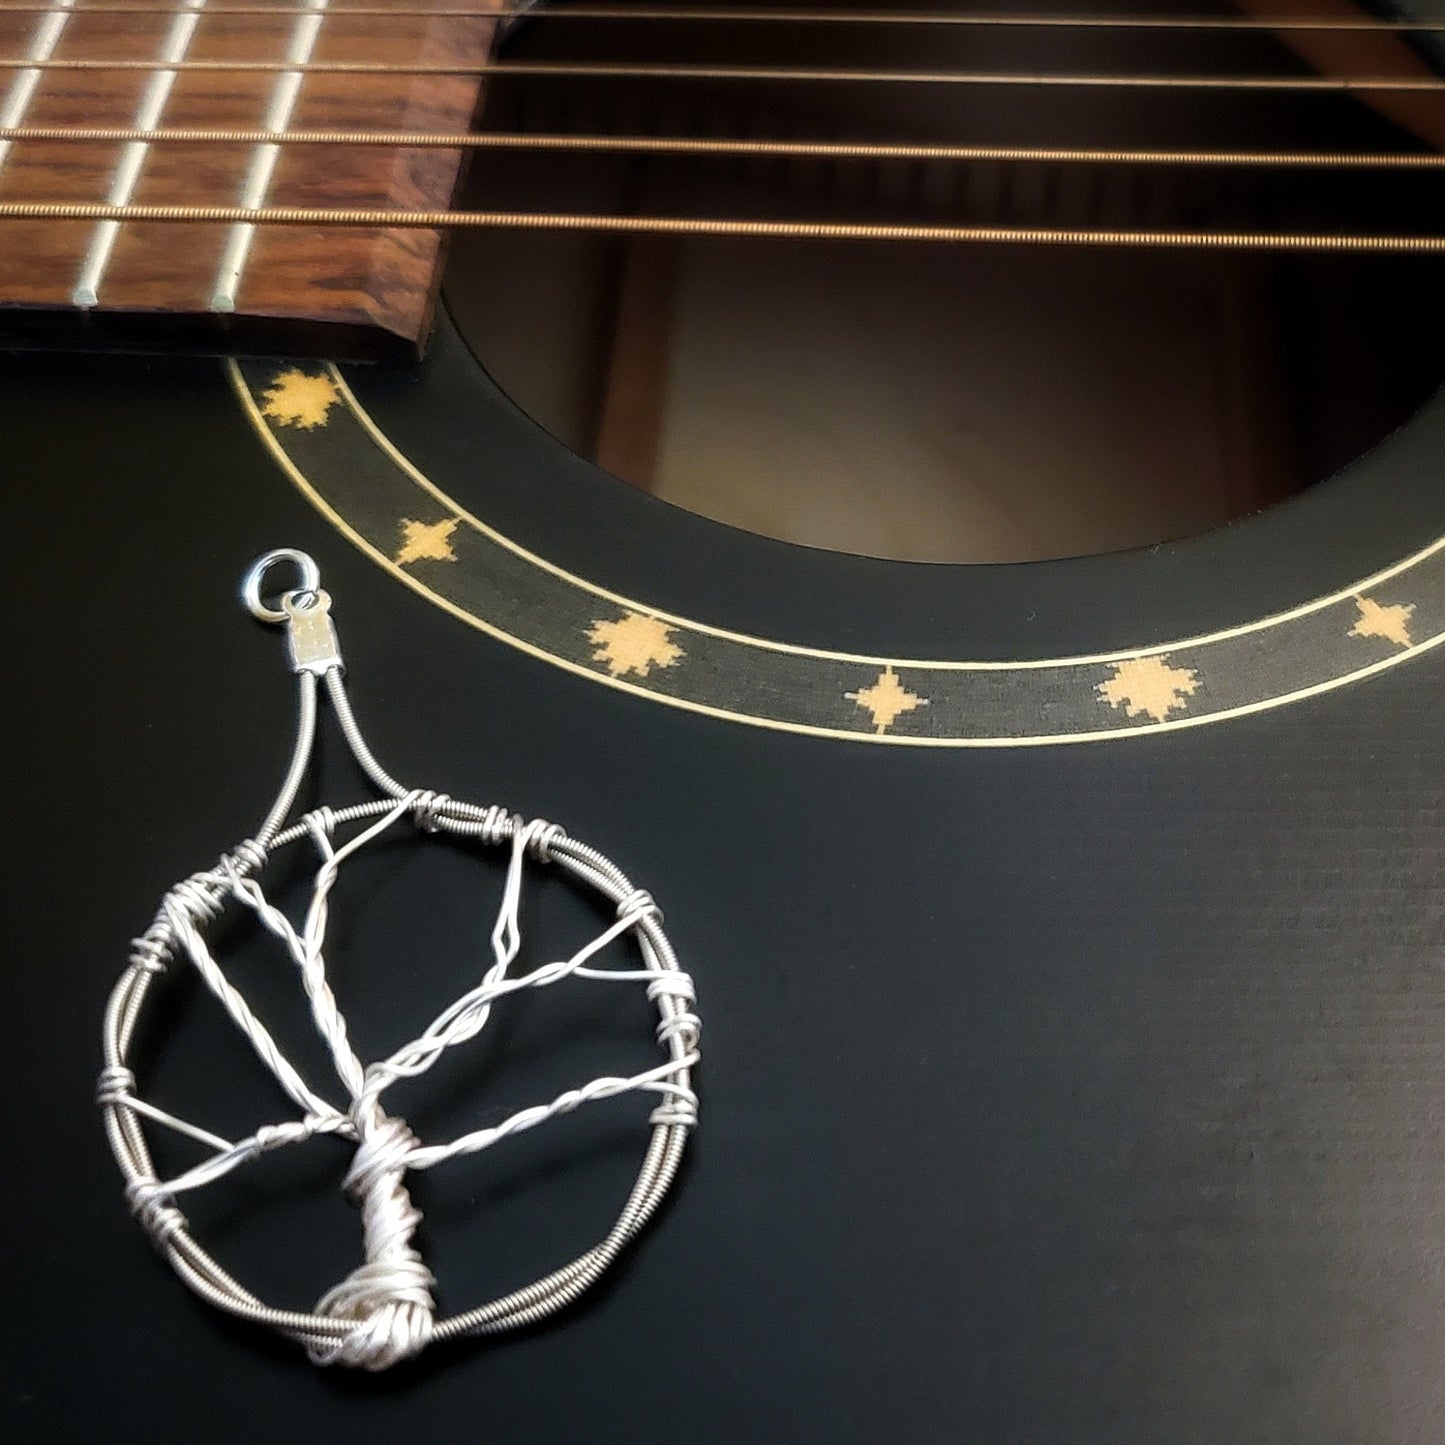 a pendant in the shape of a tree with a circle around it - the tree is made of silver coloured wire and the circle is made from upcycled guitar strings - the pendant lies the body on a black guitar